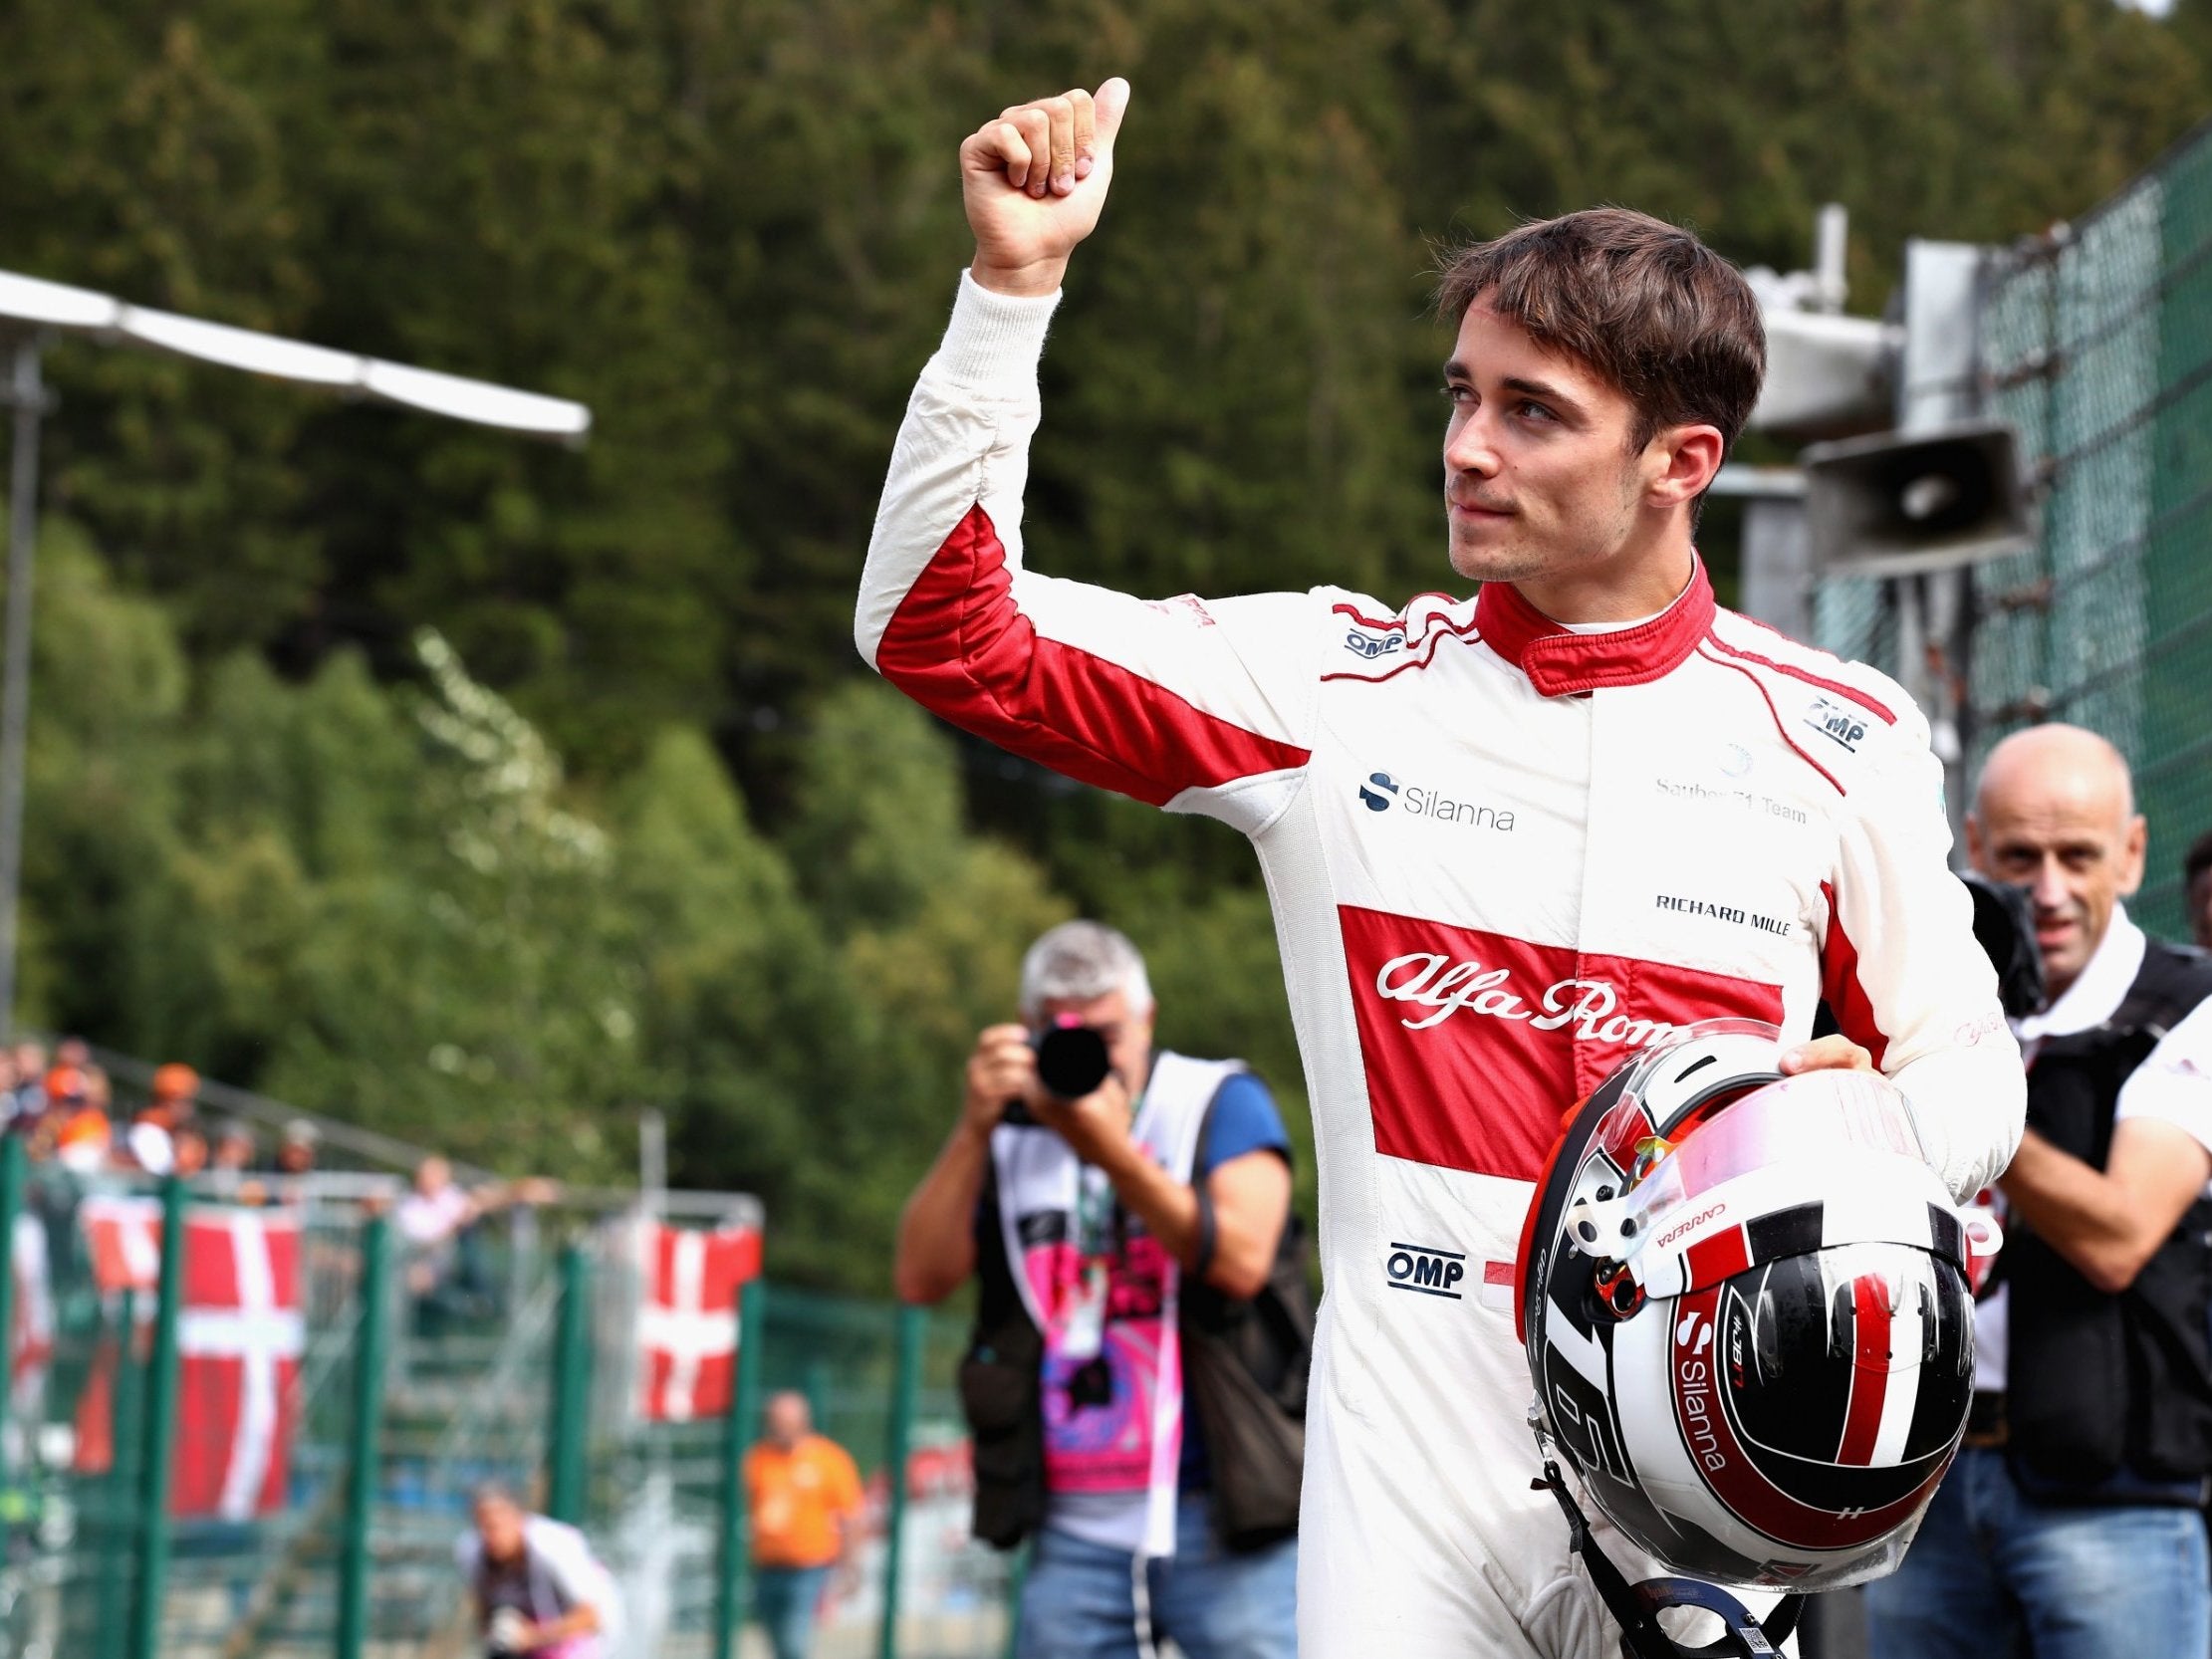 Ferrari have promoted Leclerc following a series of impressive drives this season